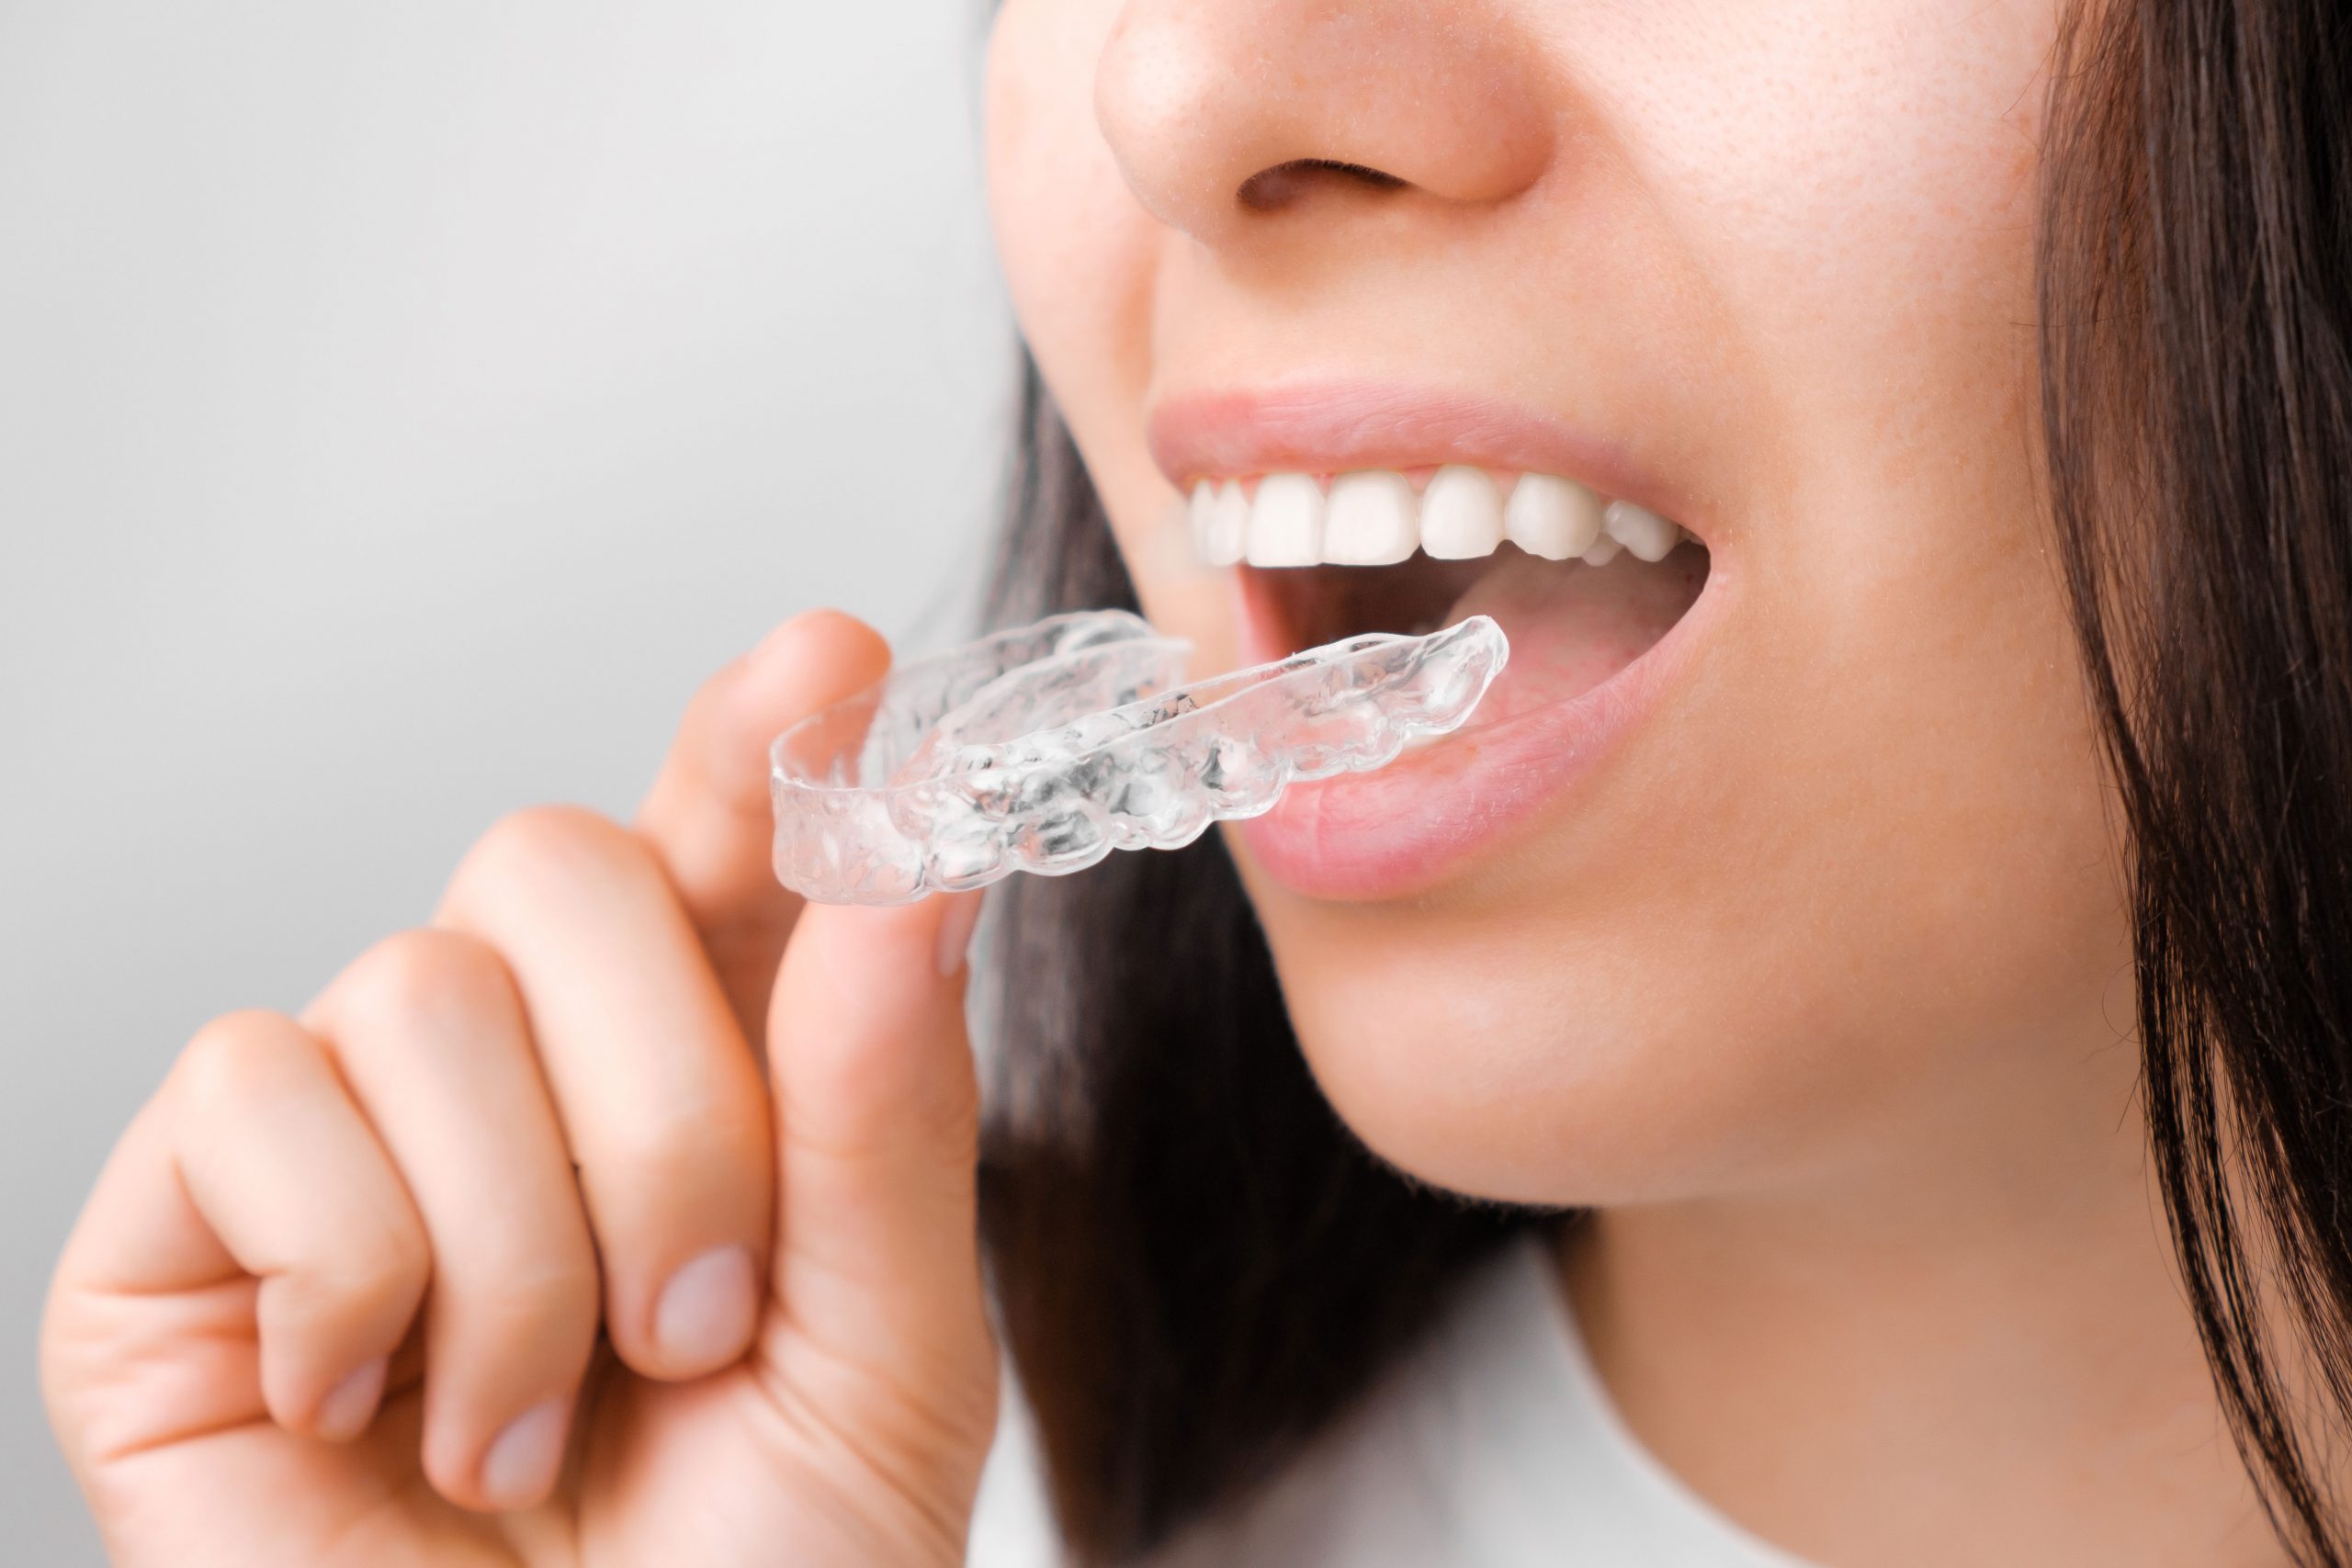 Advantages Of Invisalign Trays Over Other Conventional Orthodontic  treatments  Home - Dental Clinic In Dubai, Dentist In Dubai, Cosmetic  Dentistry, Dental Implants, Root Canal Treatment RCT, Teeth Whitening,  Dental Braces, Veneers